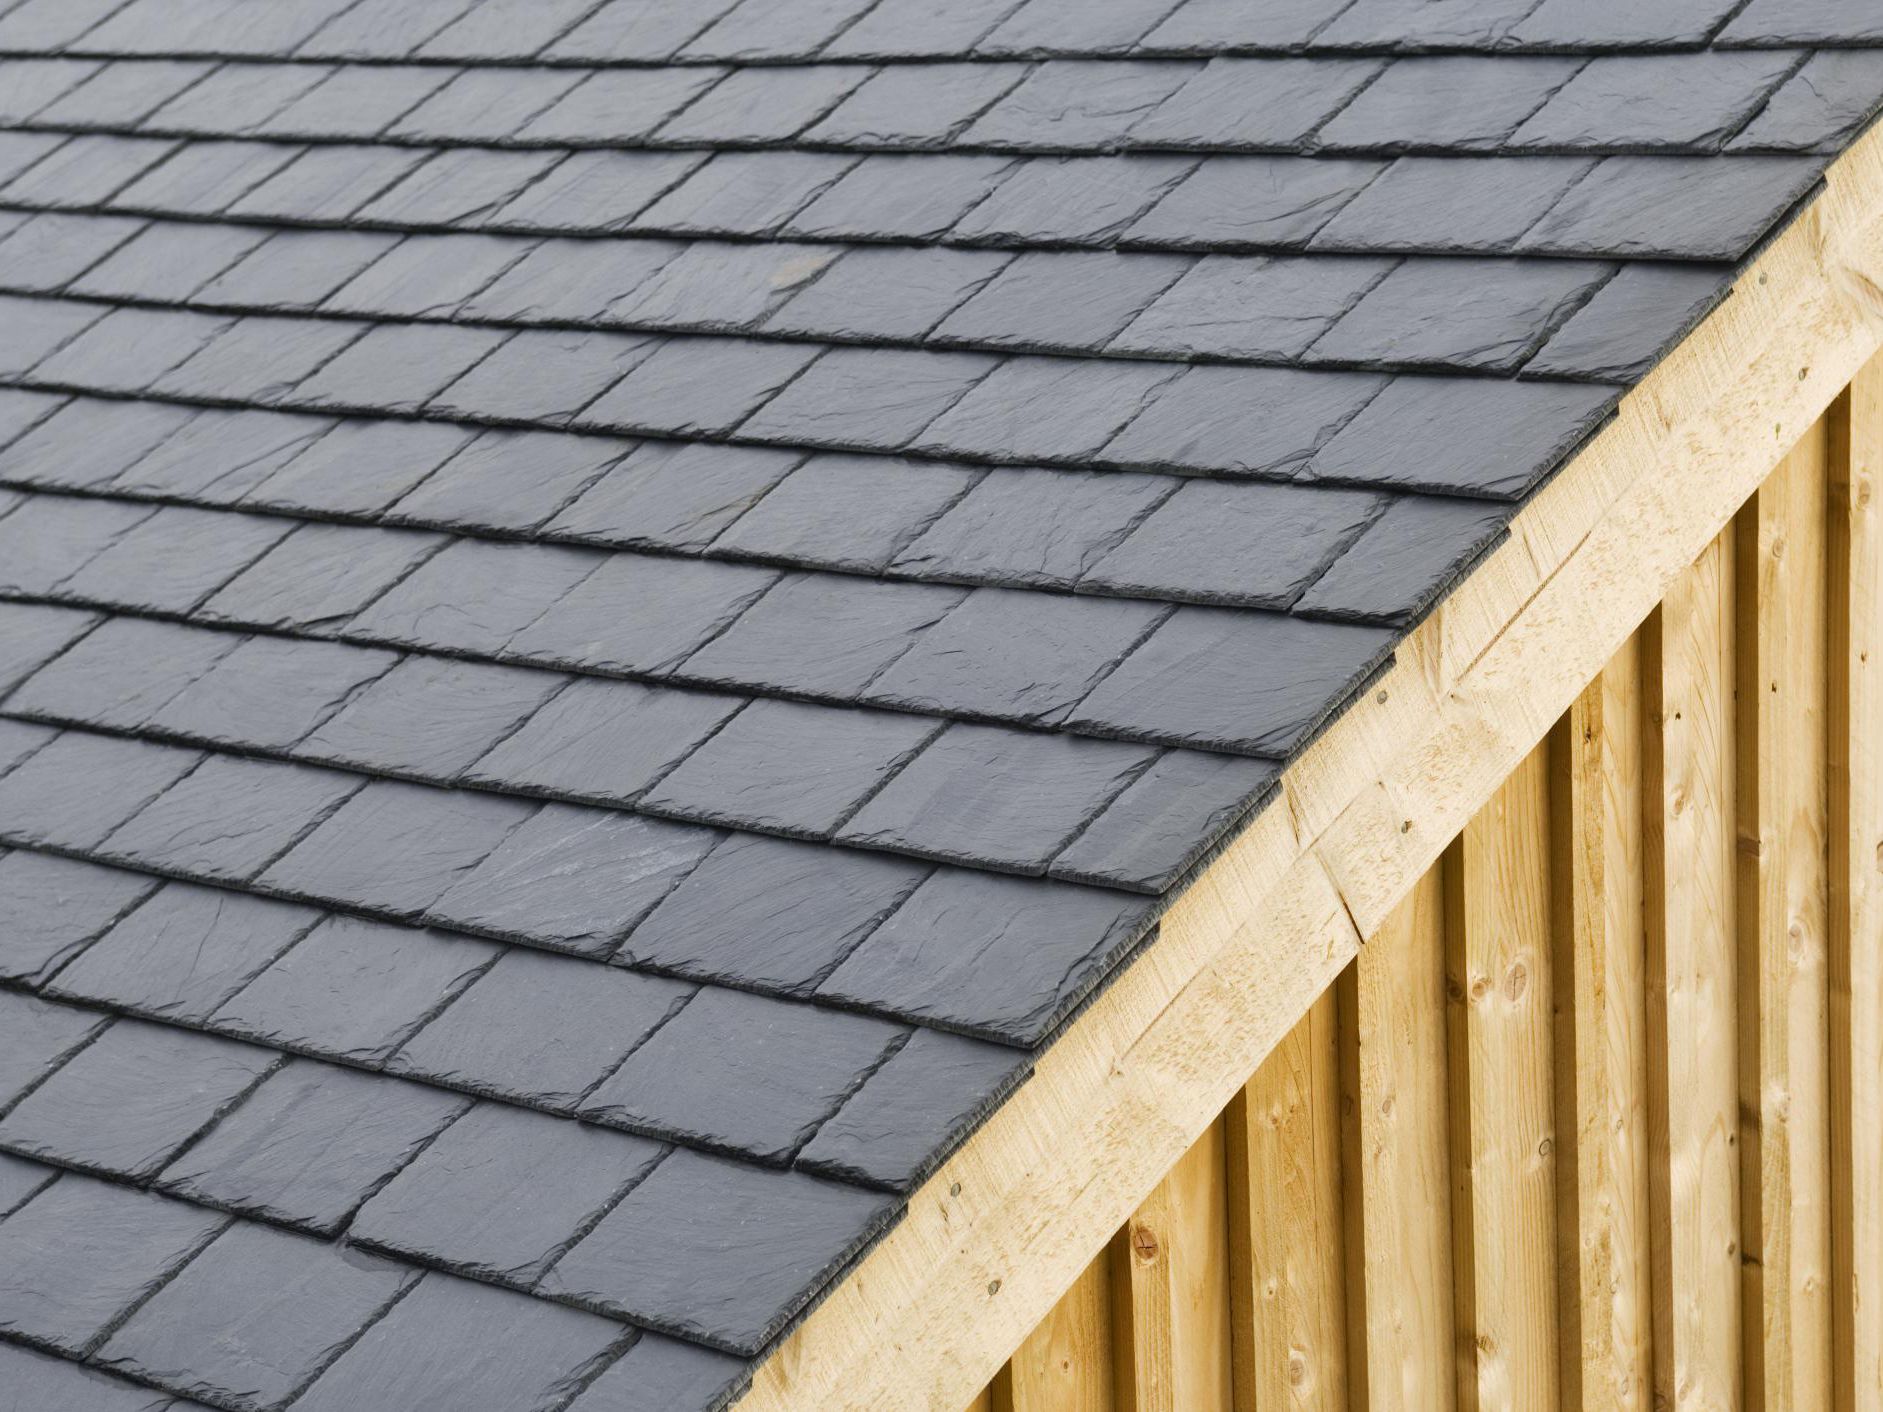 How Much Does A New Slate Roof Cost, Alternatives To Natural Slate Roof Tiles